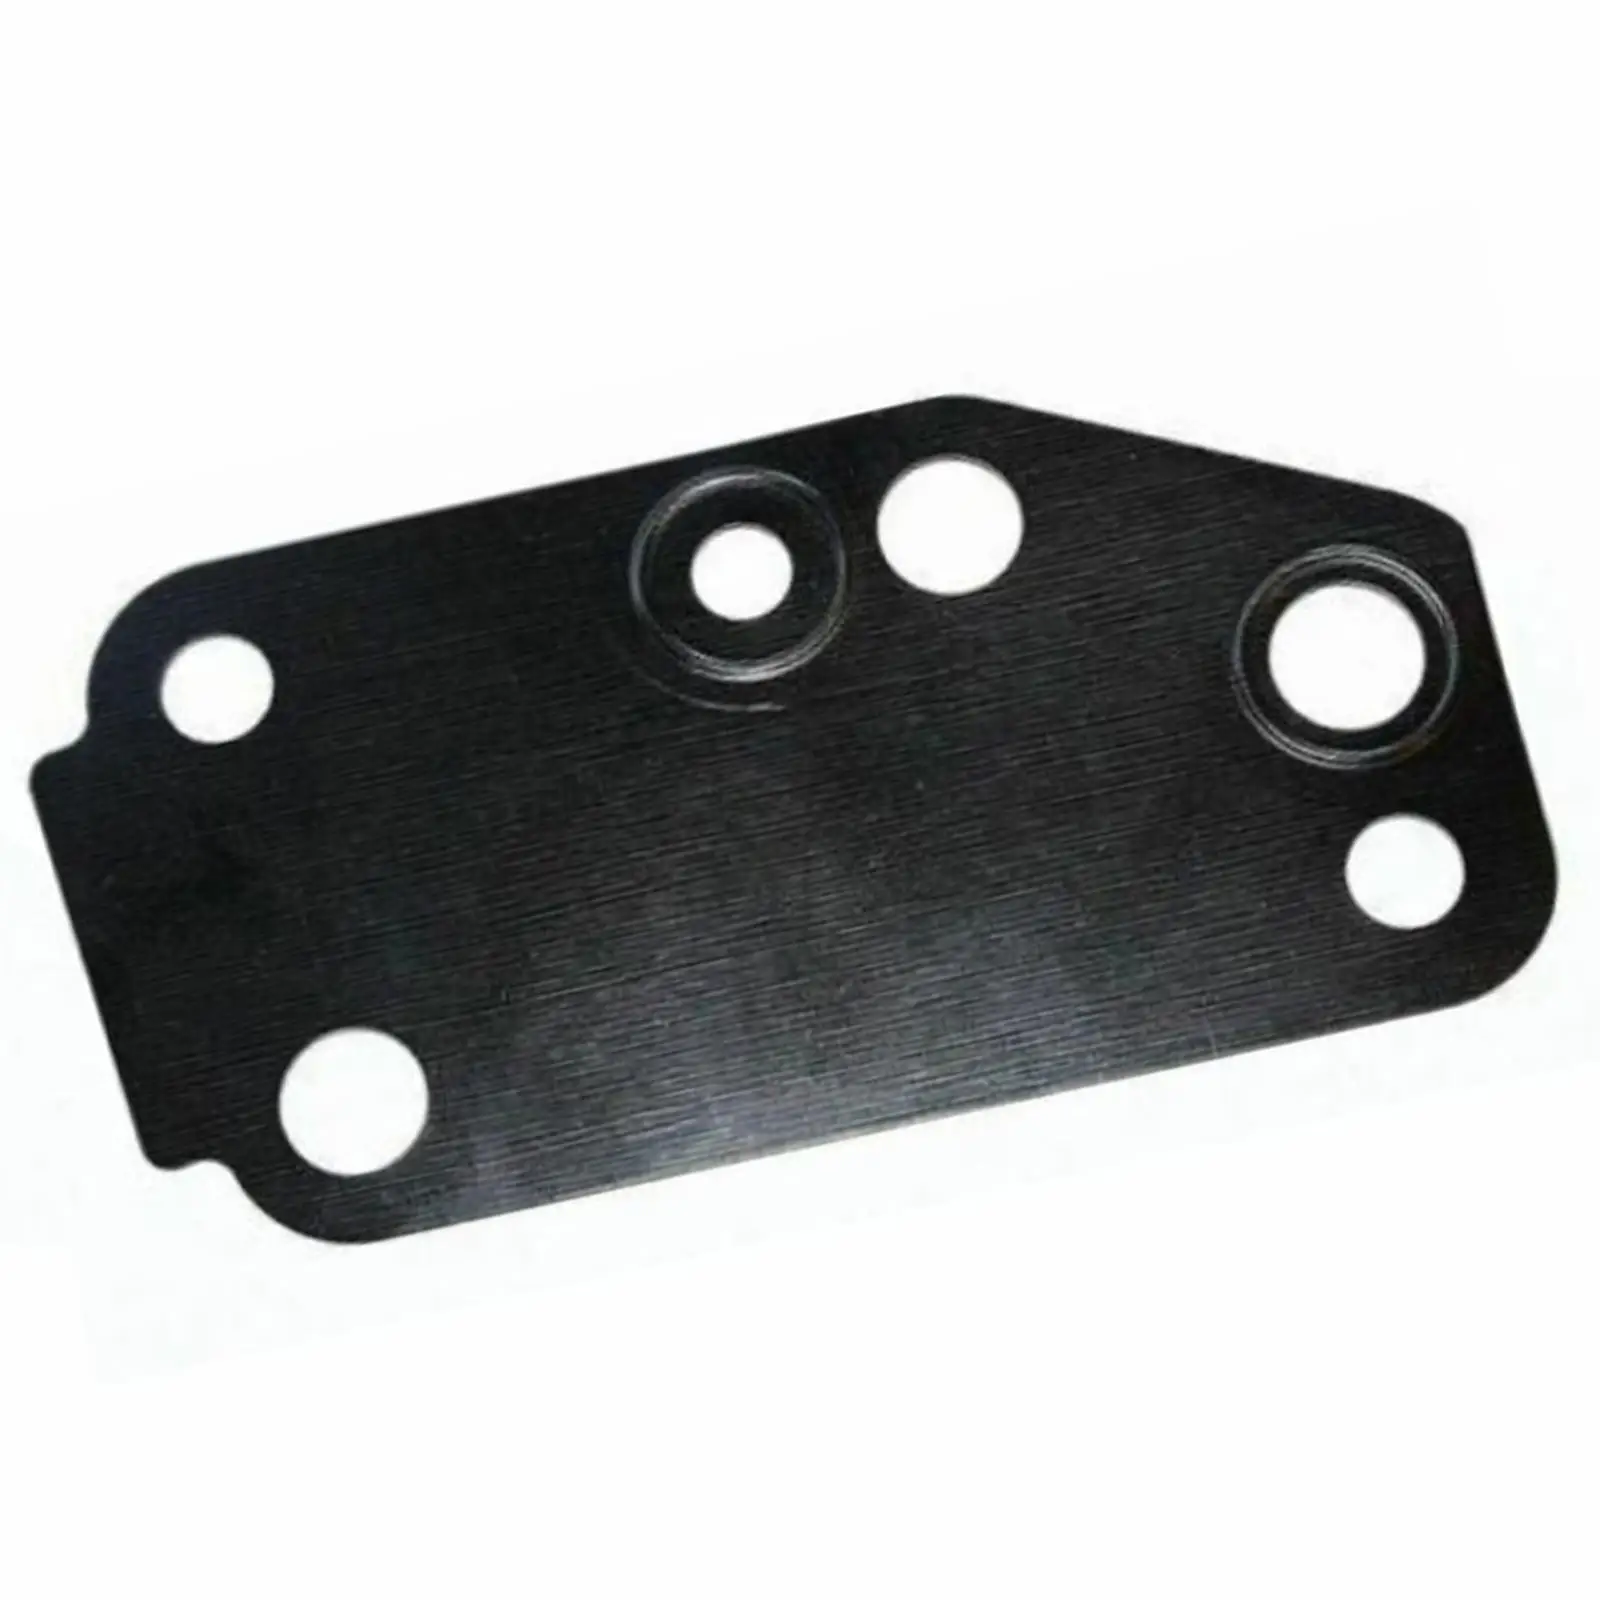 Water Pump Gasket Repair Gasket Accessories Interior Replace Assembly for Transport 2.4 2000-20196559, for MK6 